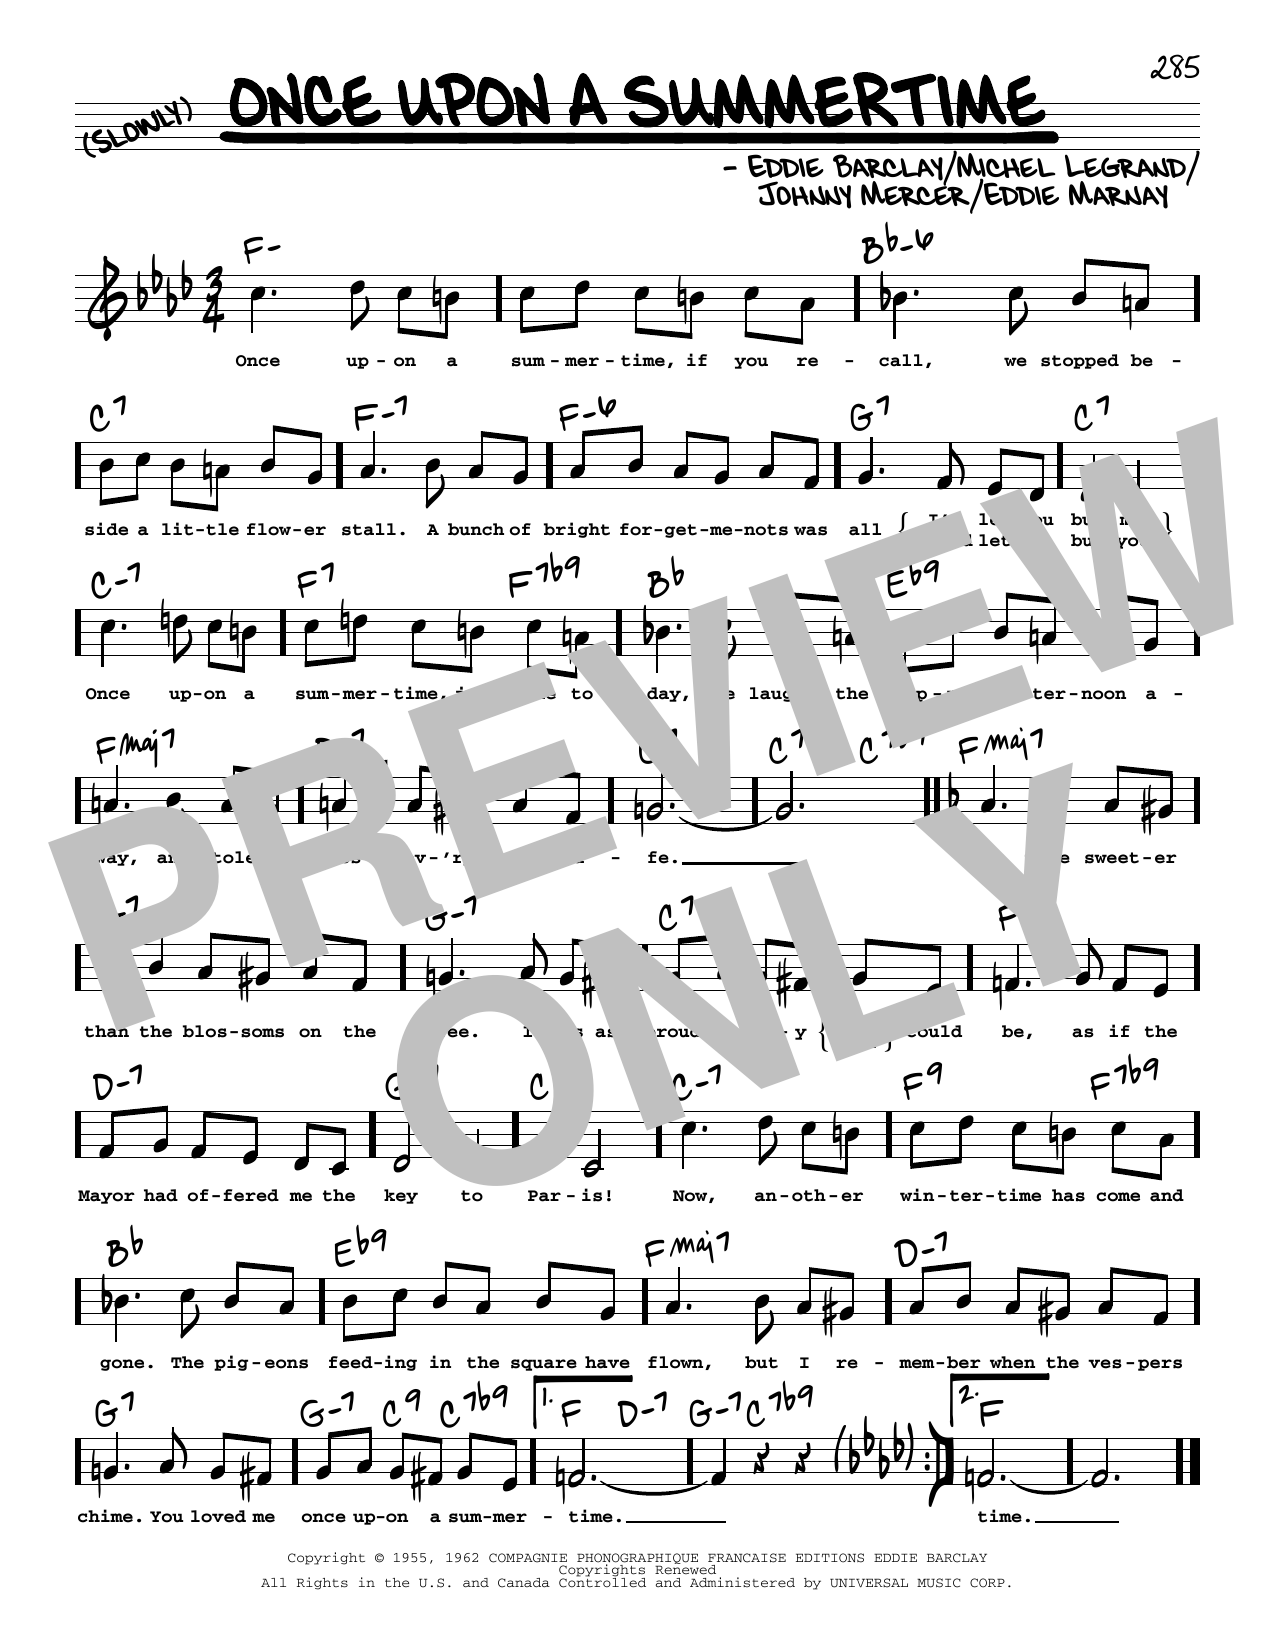 Download Tony Bennett Once Upon A Summertime (High Voice) Sheet Music